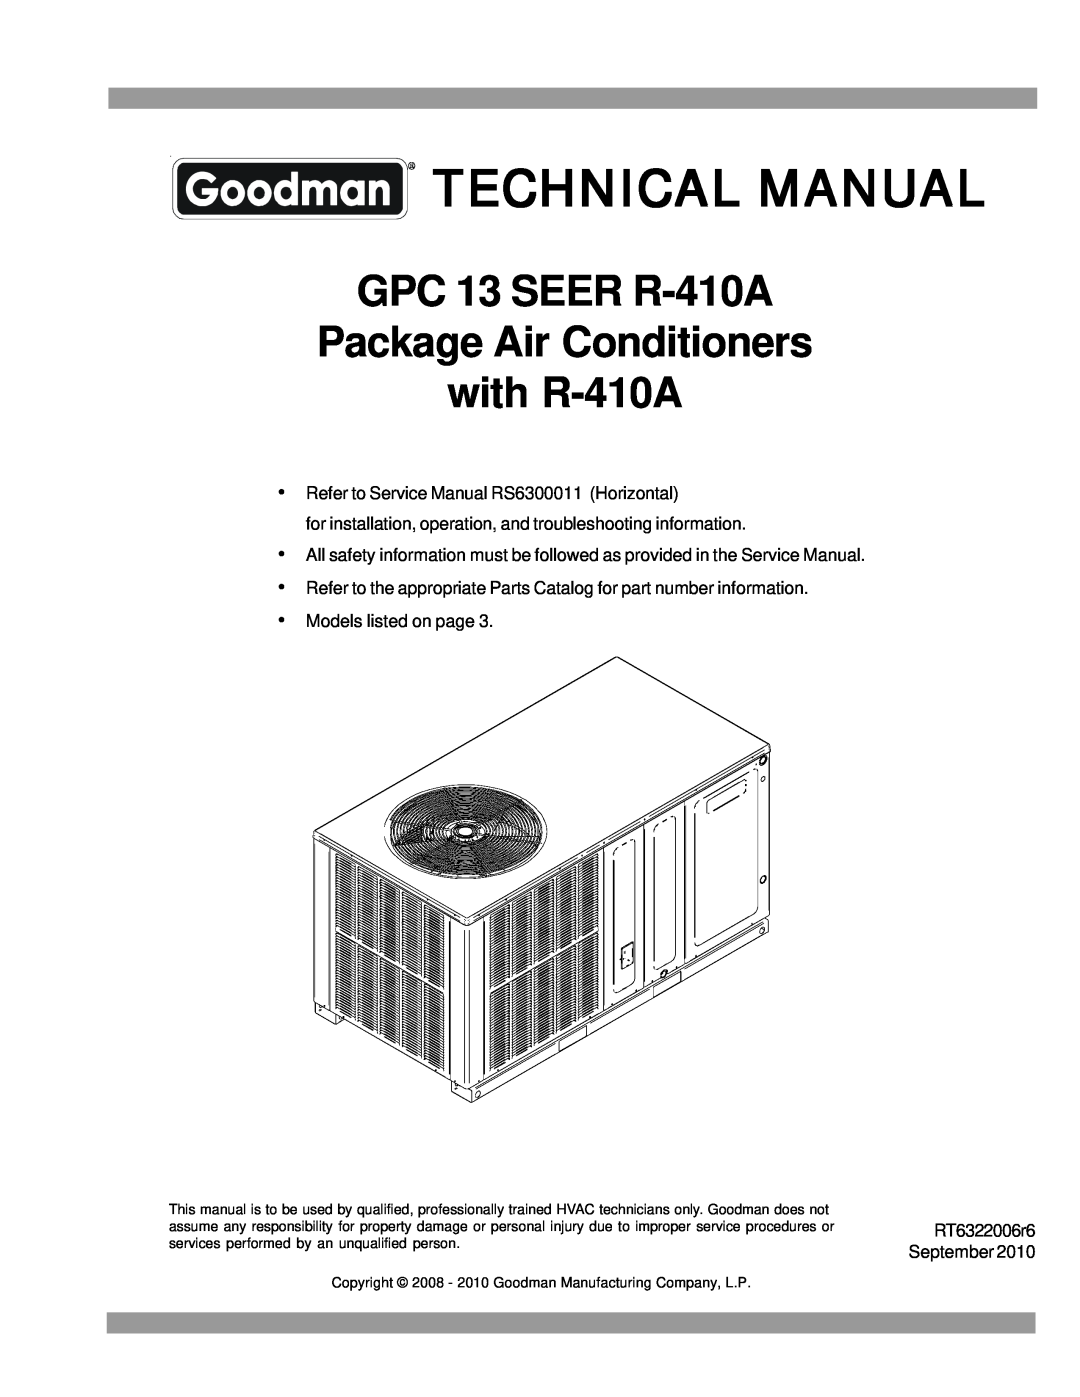 Goodmans GPC1324H41A service manual GPC 13 SEER R-410A Package Air Conditioners, with R-410A, Technical Manual 